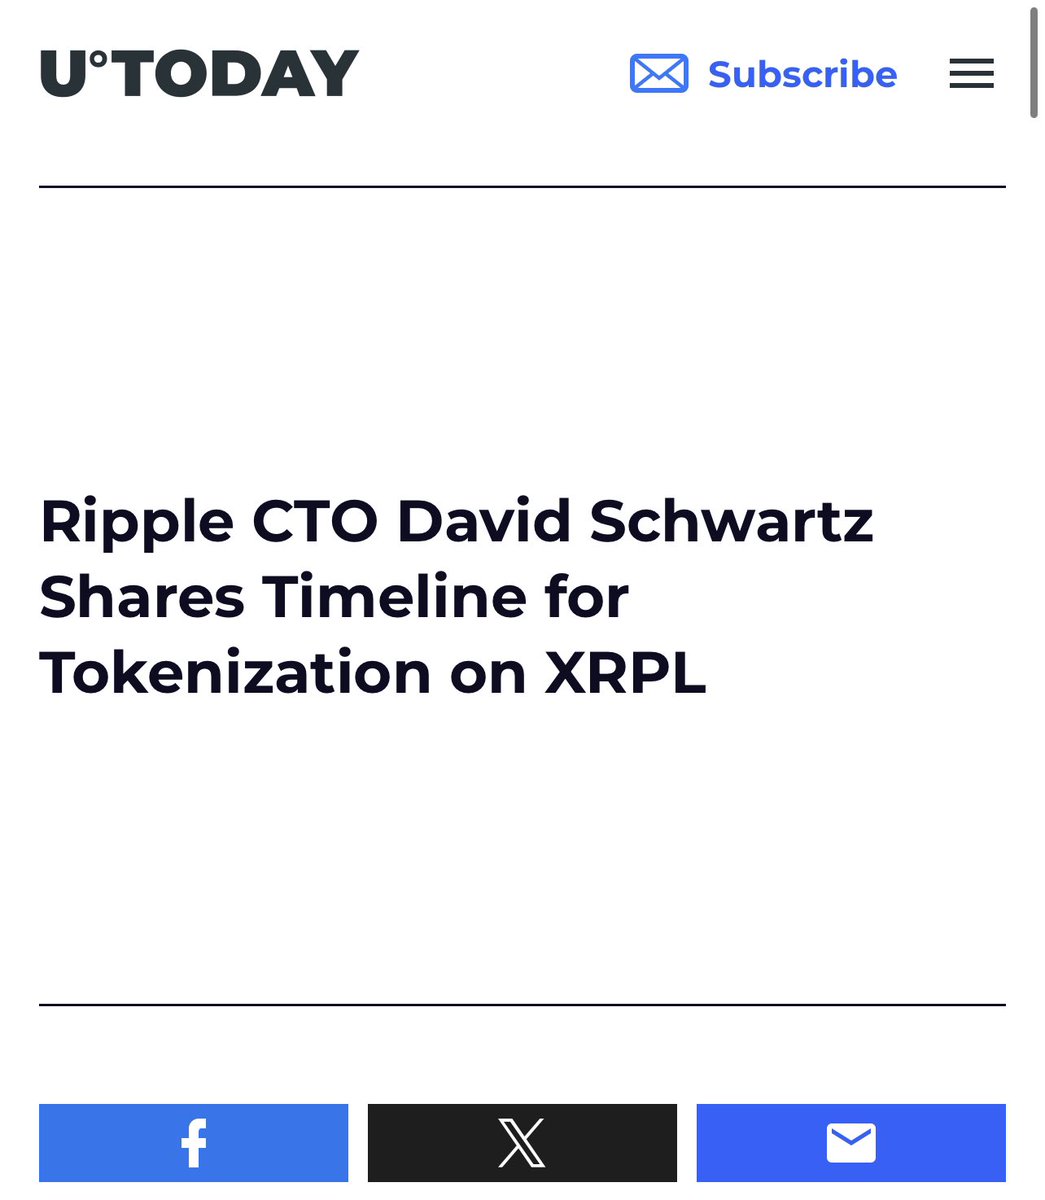 David Schwartz CTO of Ripple, says the tokenization of RWA’s (Real world assets) may launch on the XRPL within 1 year - 1.5 years. Get ready for an enormous amount of value to flow into the XRPL. 

#XRP #XRPL #Ripple #XRPLCommunity #ISO20022 #RWA #TokenizedAssets